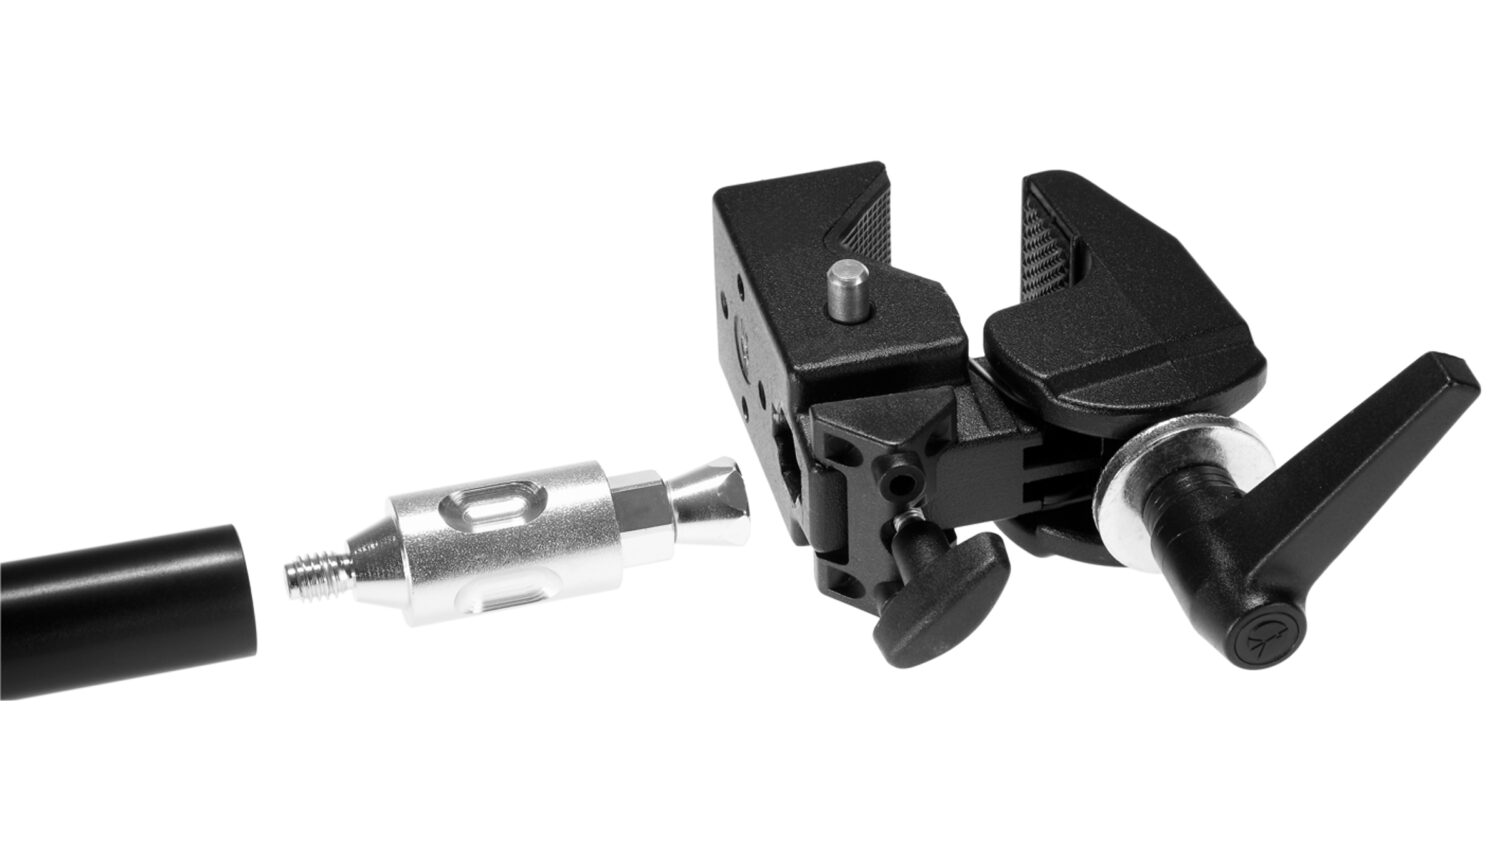 FOBA adapter for all normal superclamps to combitube